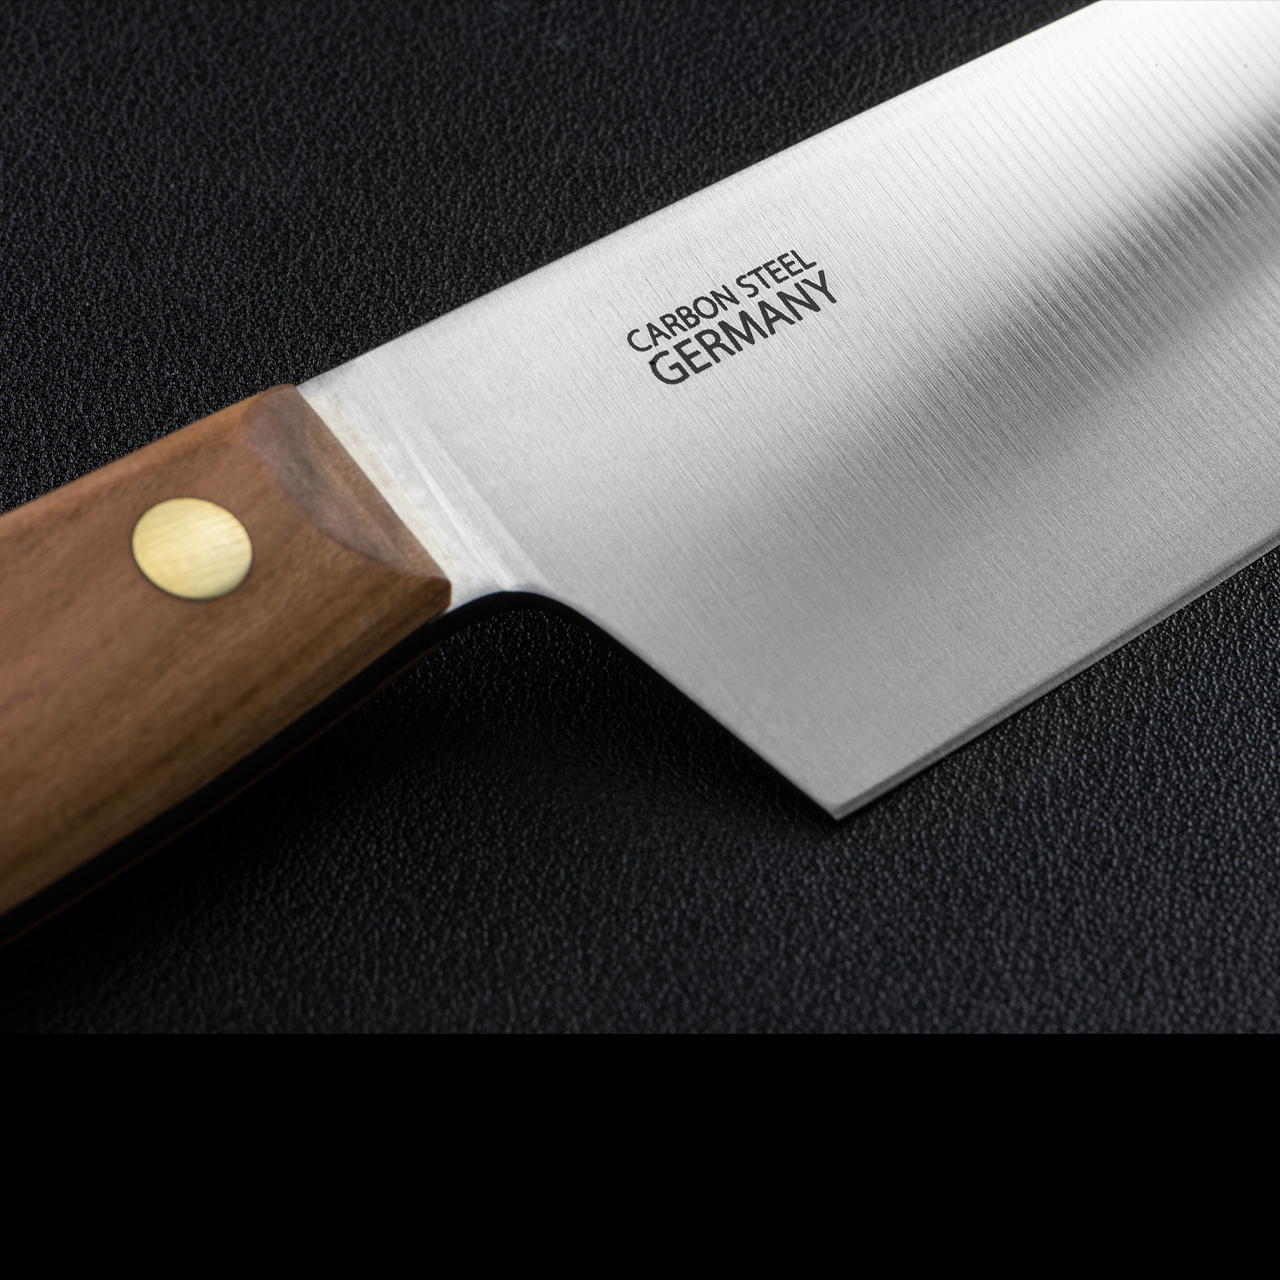 Boker Cottage-Craft 6.4 Small Chef's Knife, Plum Wood